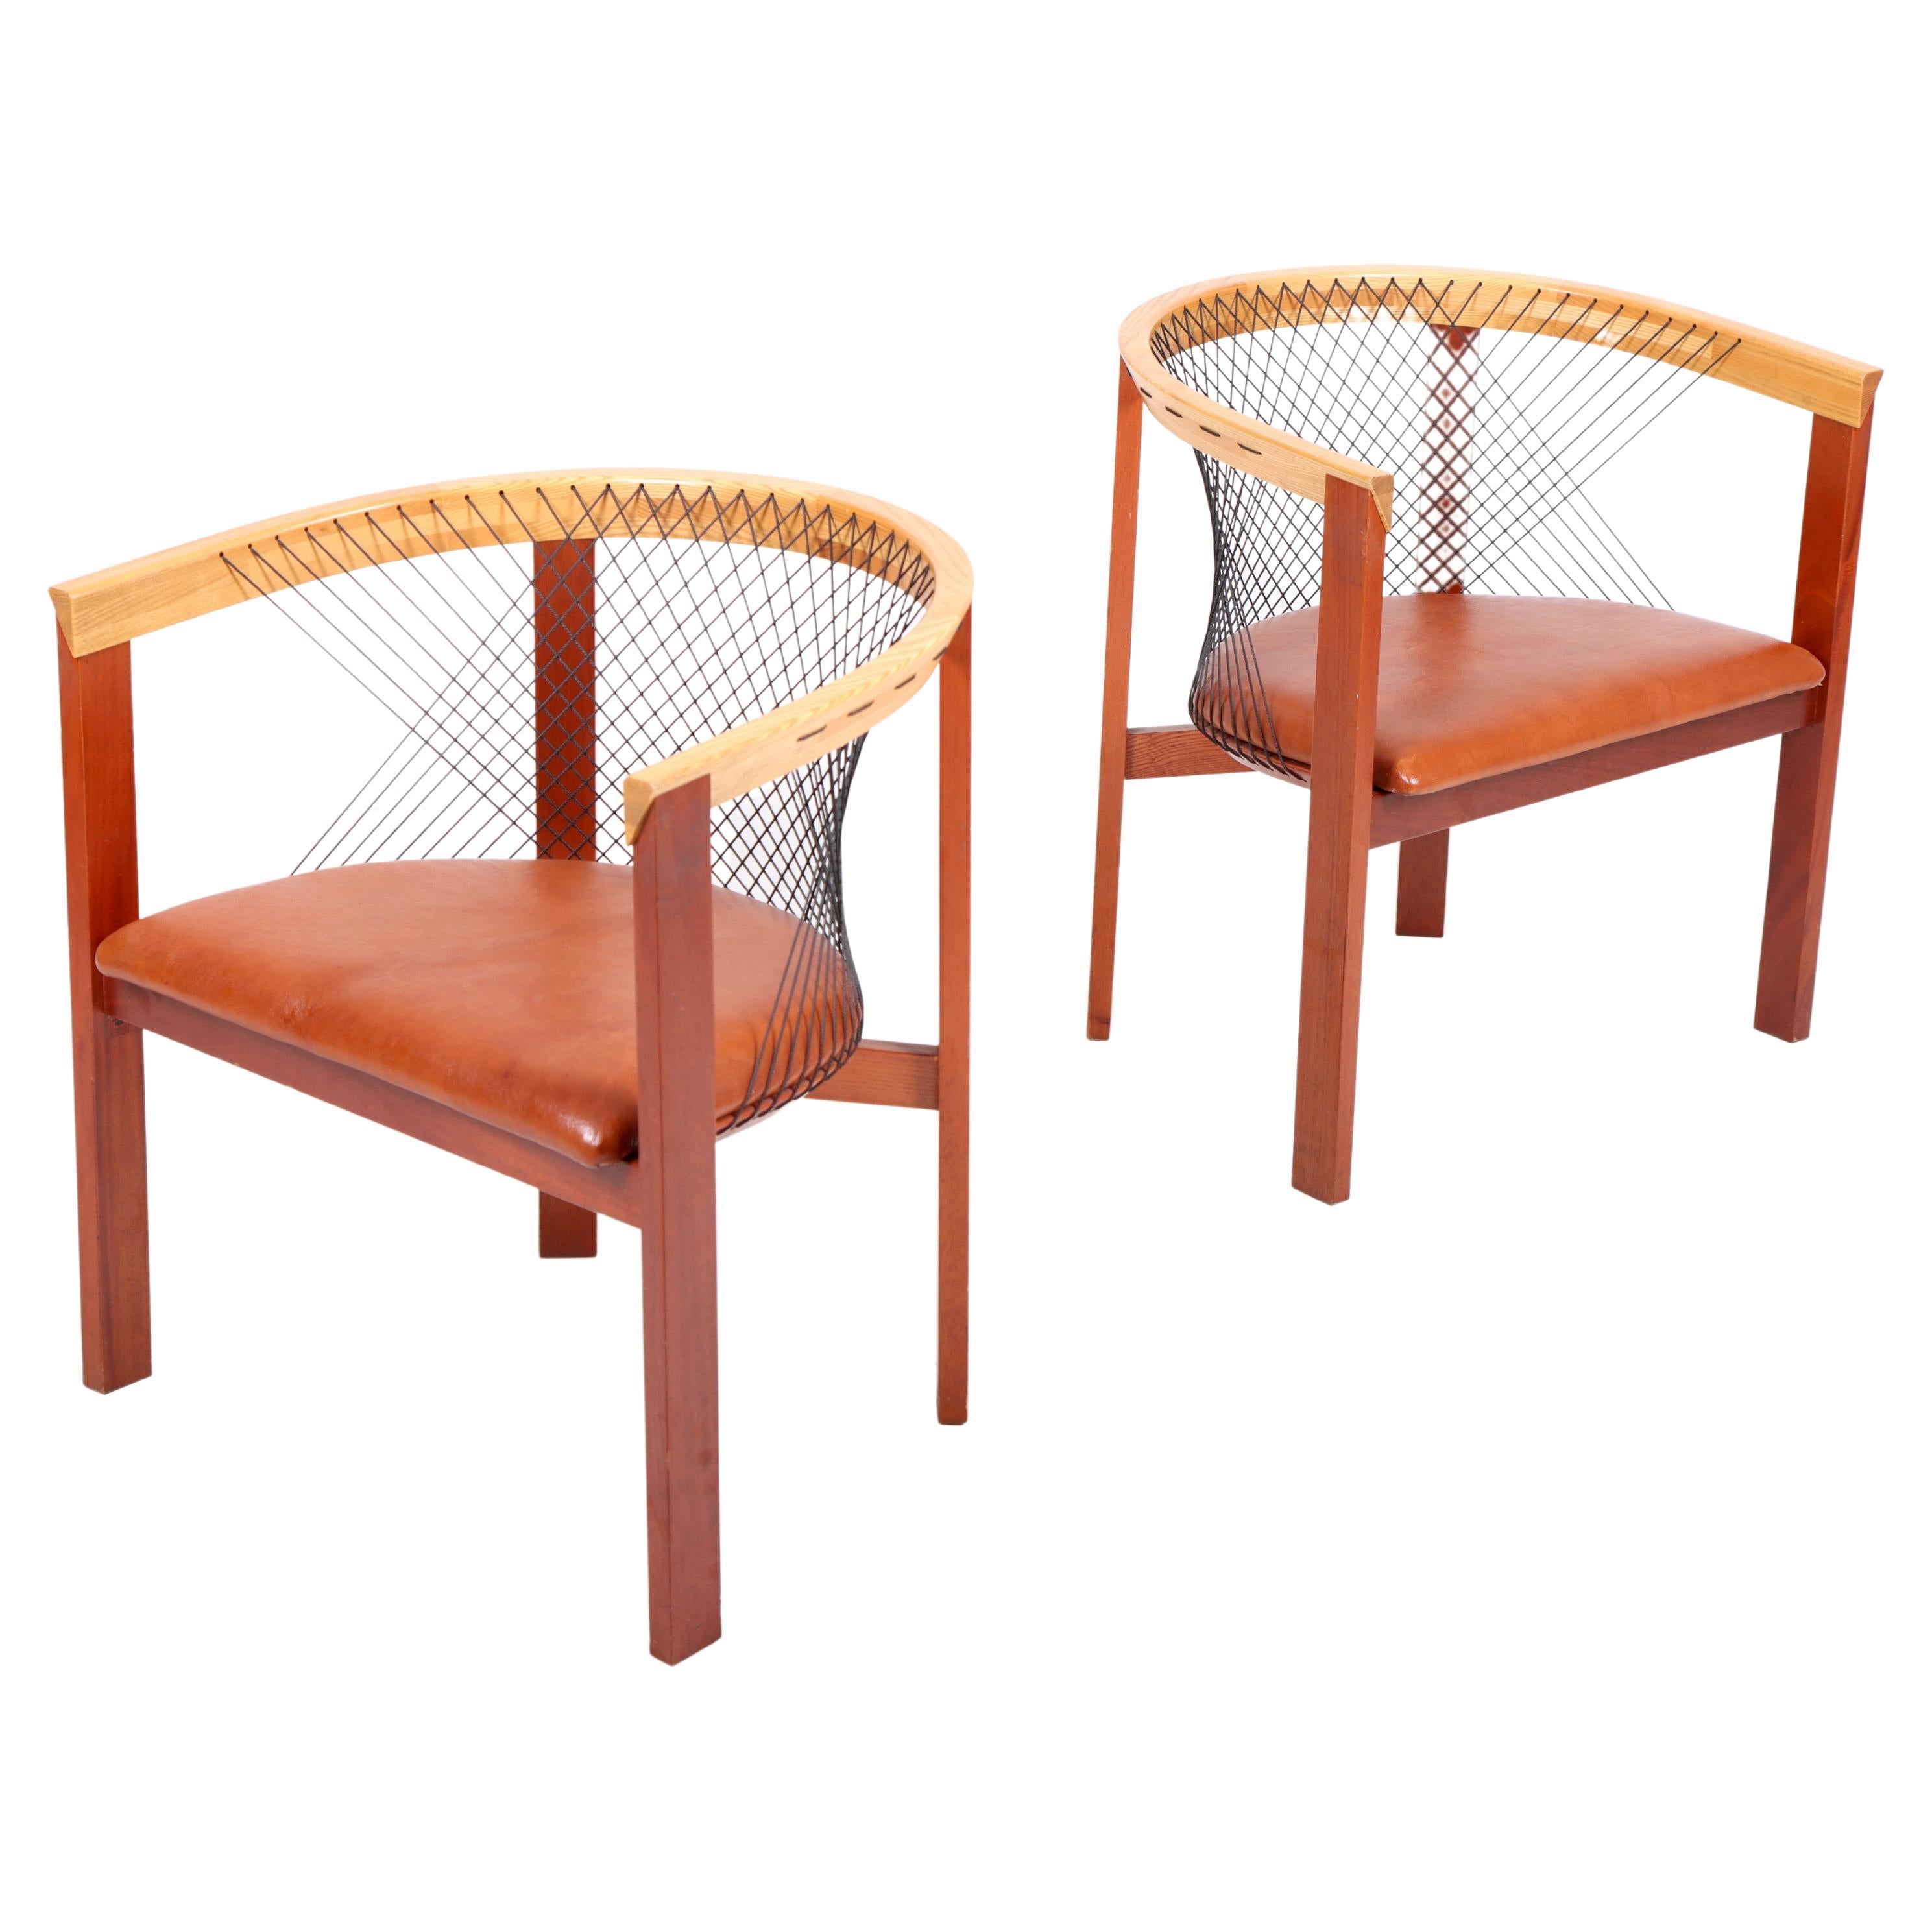 Pair of Lounge Chairs in Elm and Patinated Leather by Niels Jørgen Haugesen